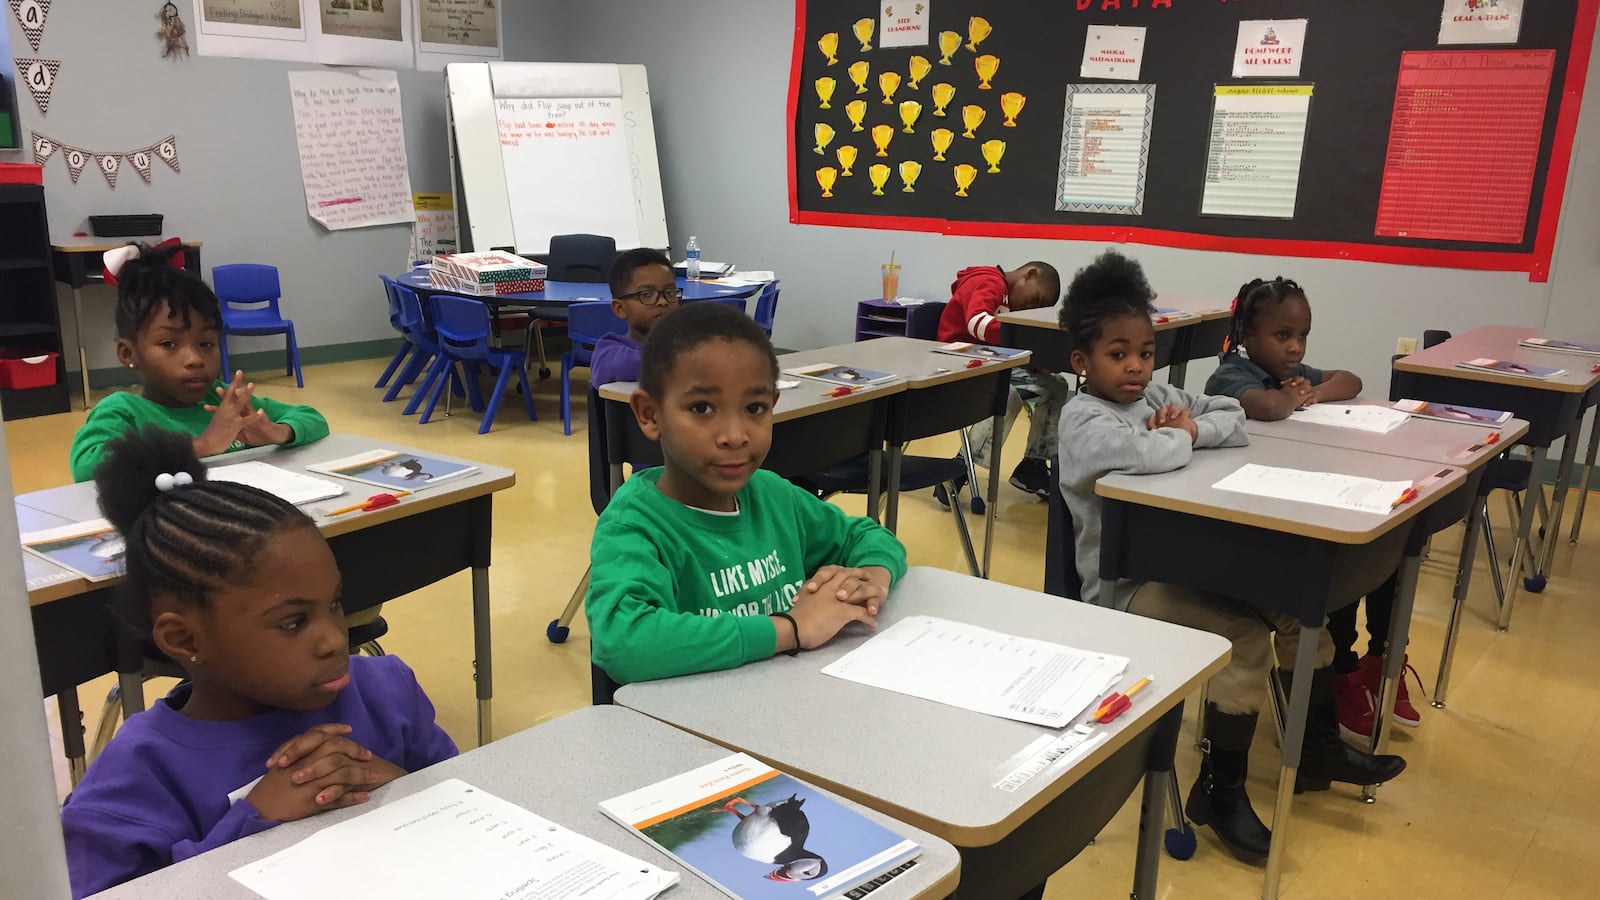 Memphis Delta Preparatory charter school is one of four schools working with ALLMemphis to develop stronger literacy curriculum.